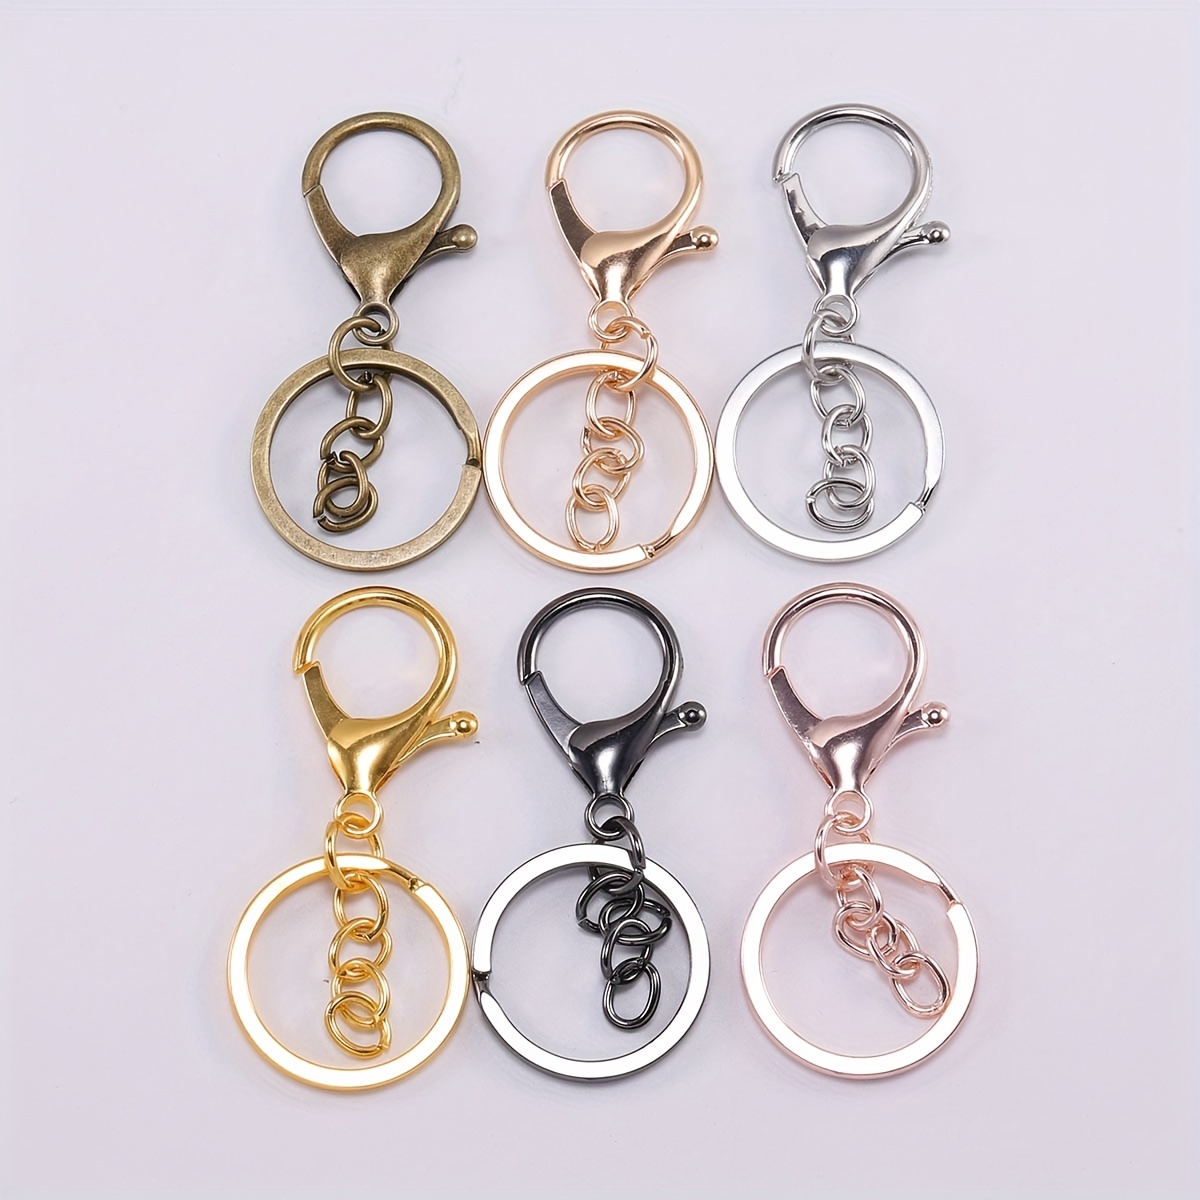 Gold Lobster Clasp Keychain Ring- 2pcs/lot